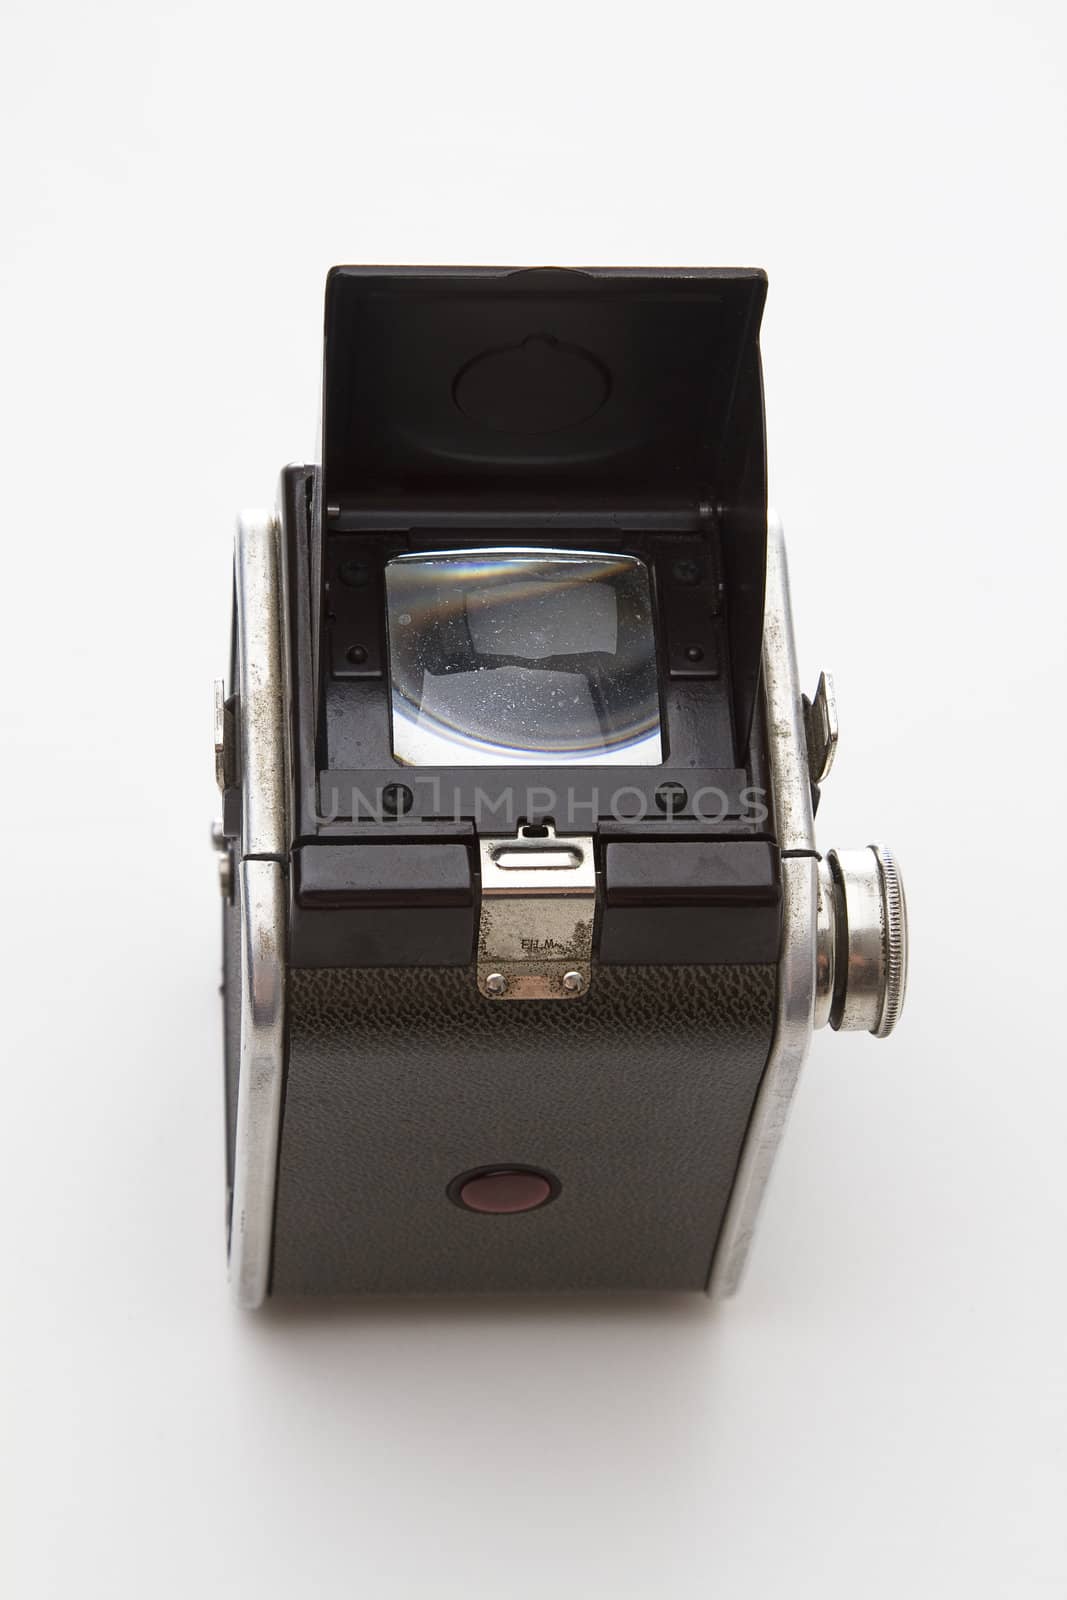 Old medium format from the 50's use by amateur photographer with viewer door open viewed from behind